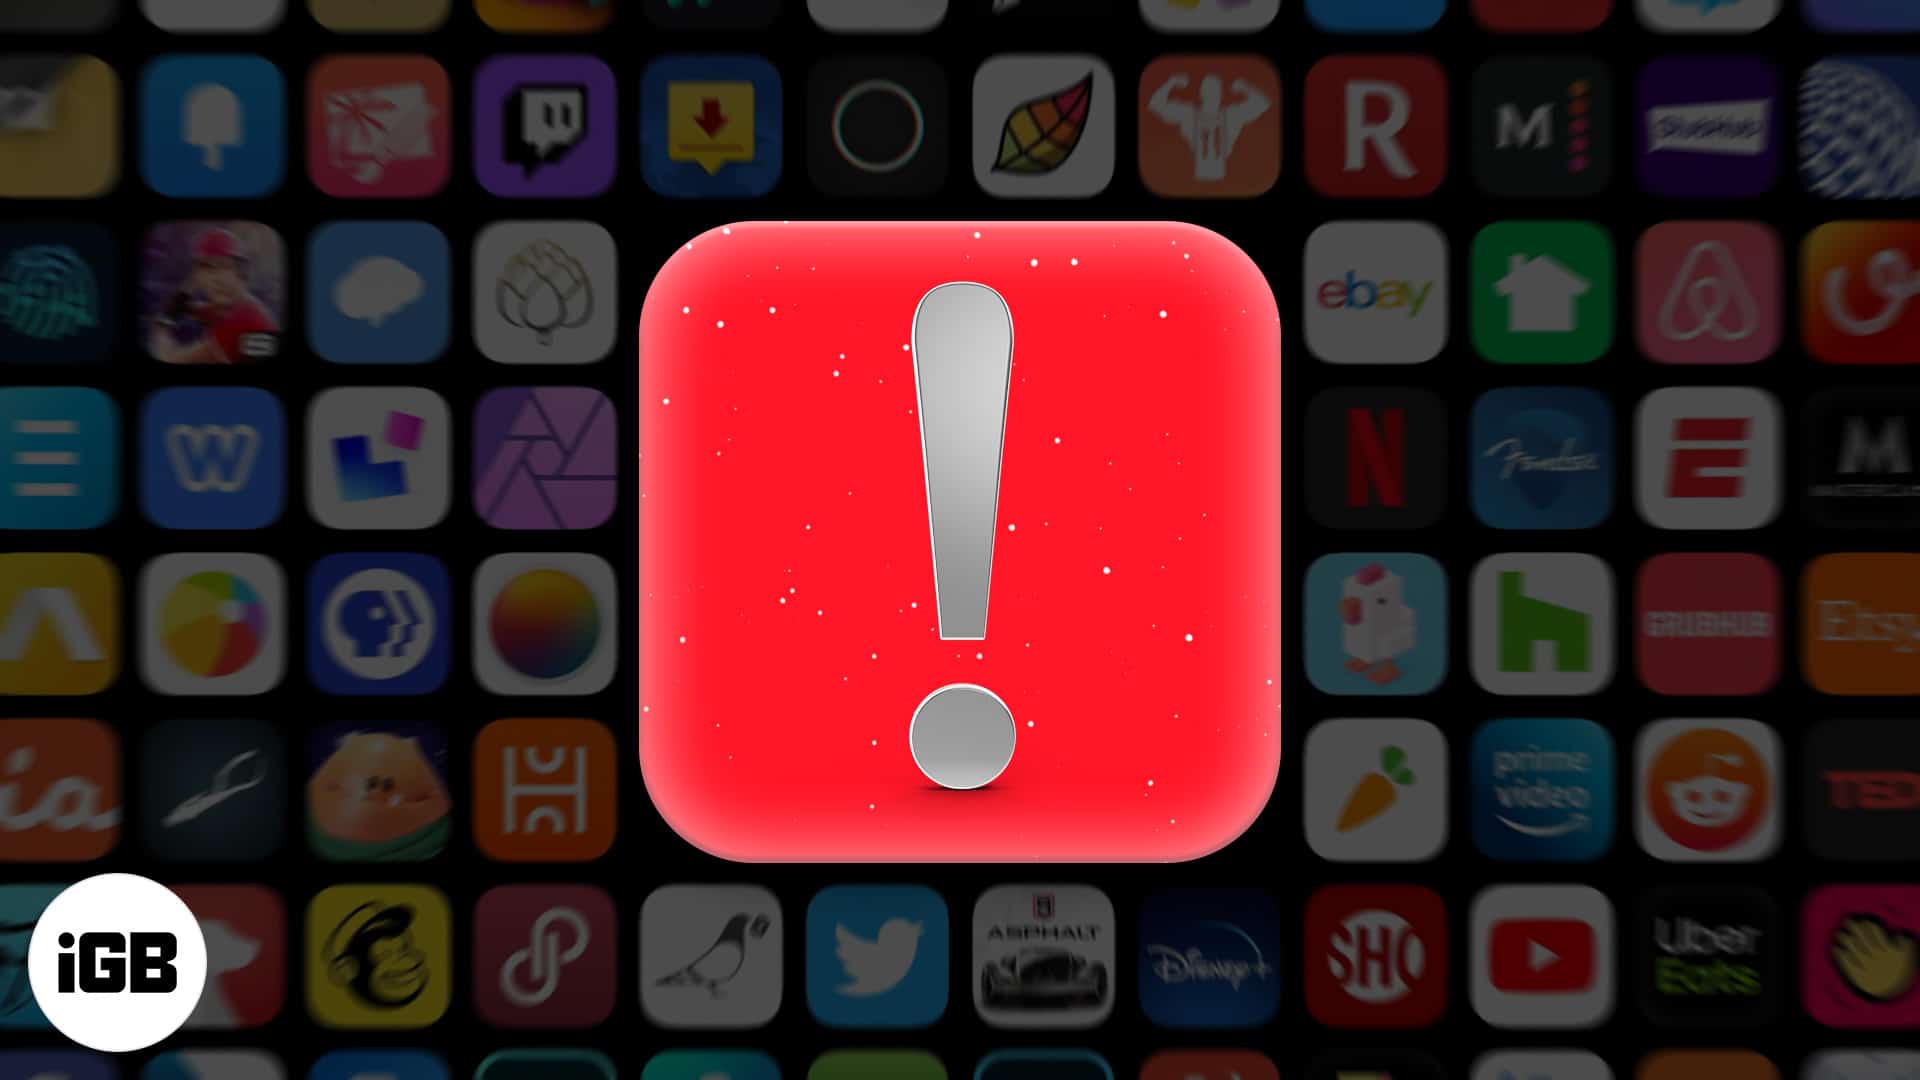 App not working on iPhone? See how to fix it